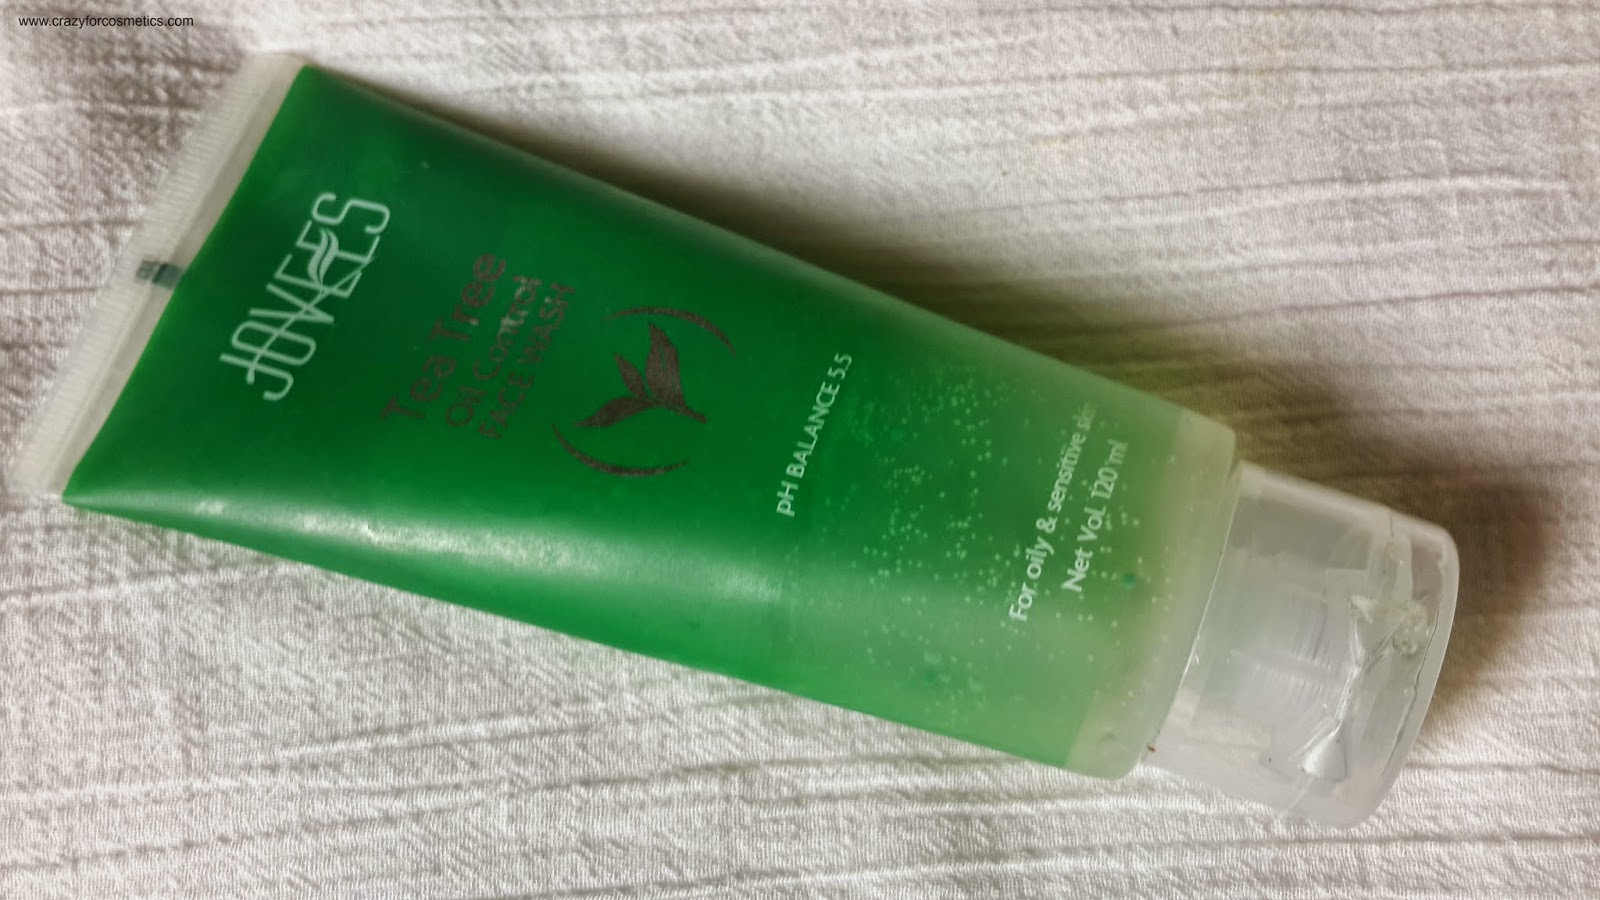 jovees tea tree oil control face wash review- jovees tea tree oil control face wash India- jovees tea tree oil control face wash price in india- face wash for acne- Product Review- Natural products for skin